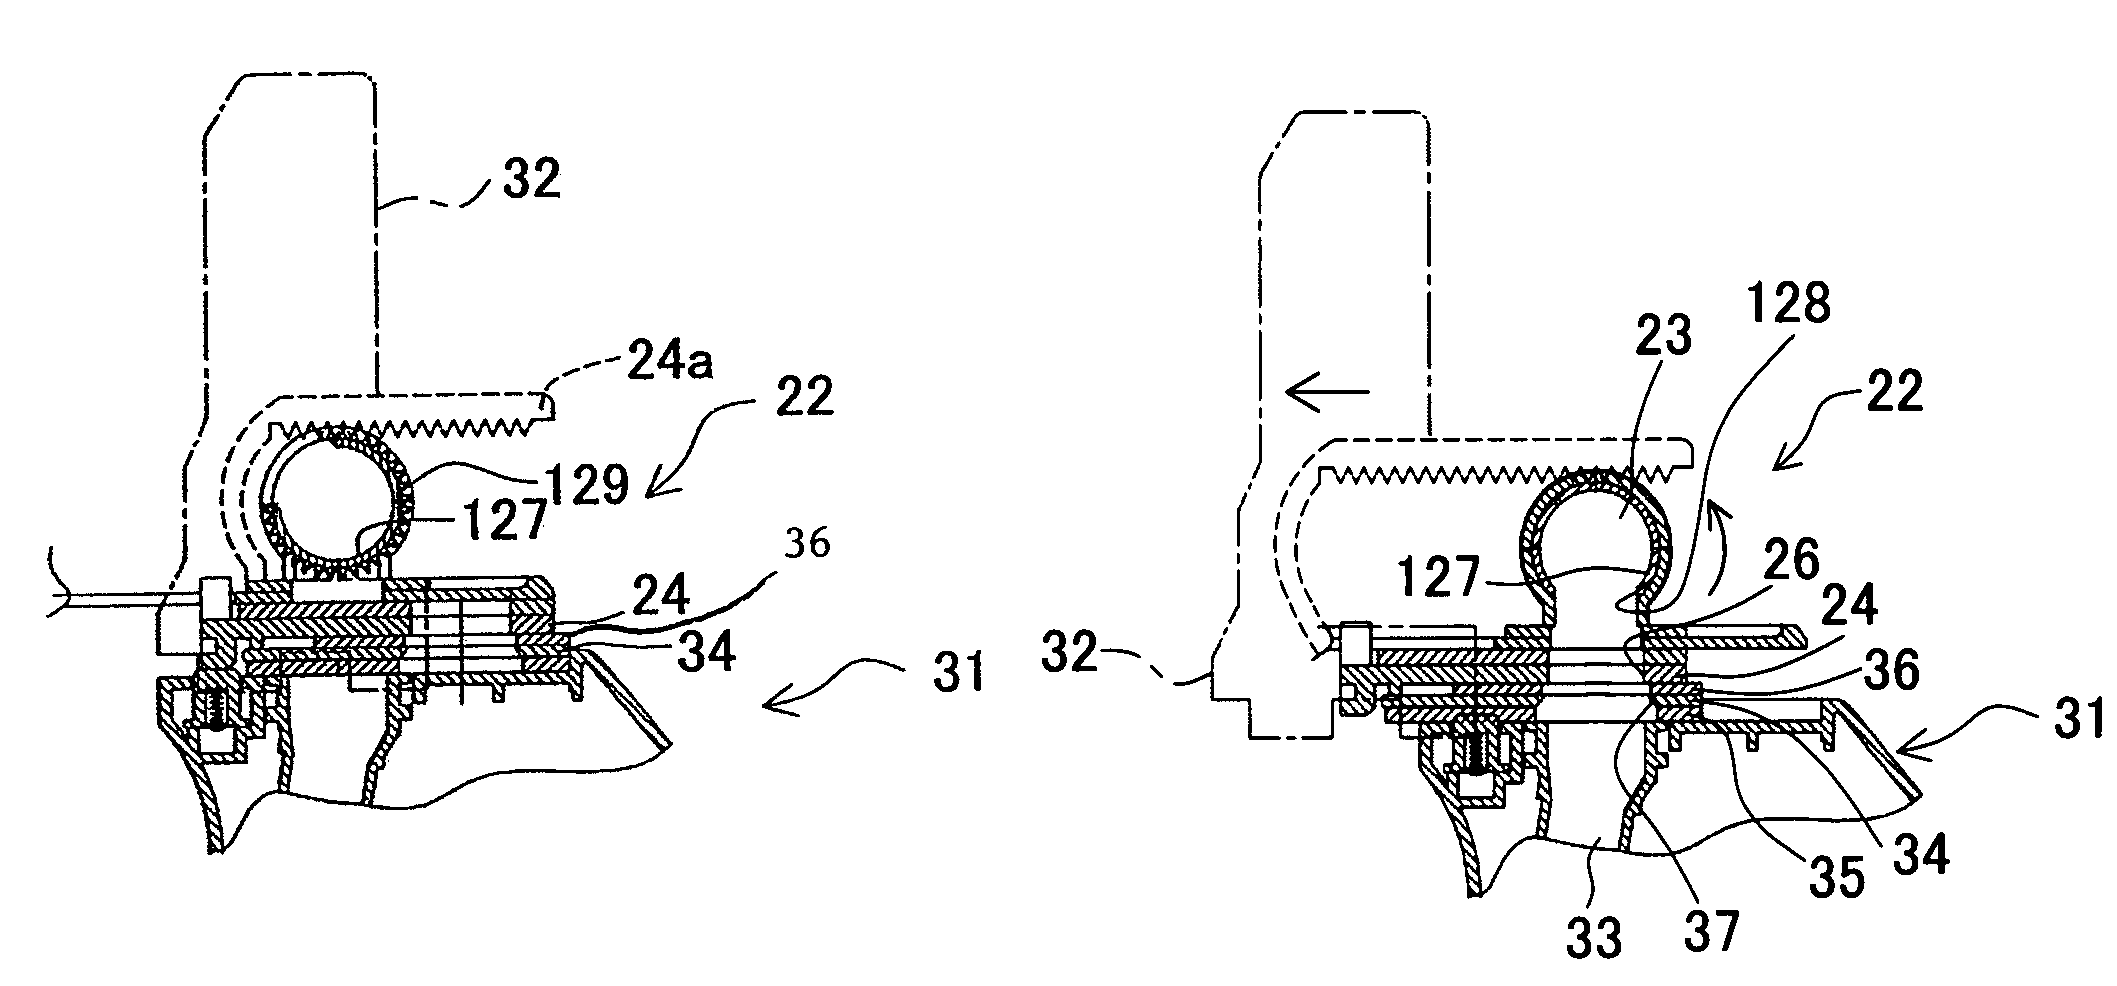 Toner cartridge, process cartridge, image cartridge, and image forming apparatus to which those cartridges are attachable